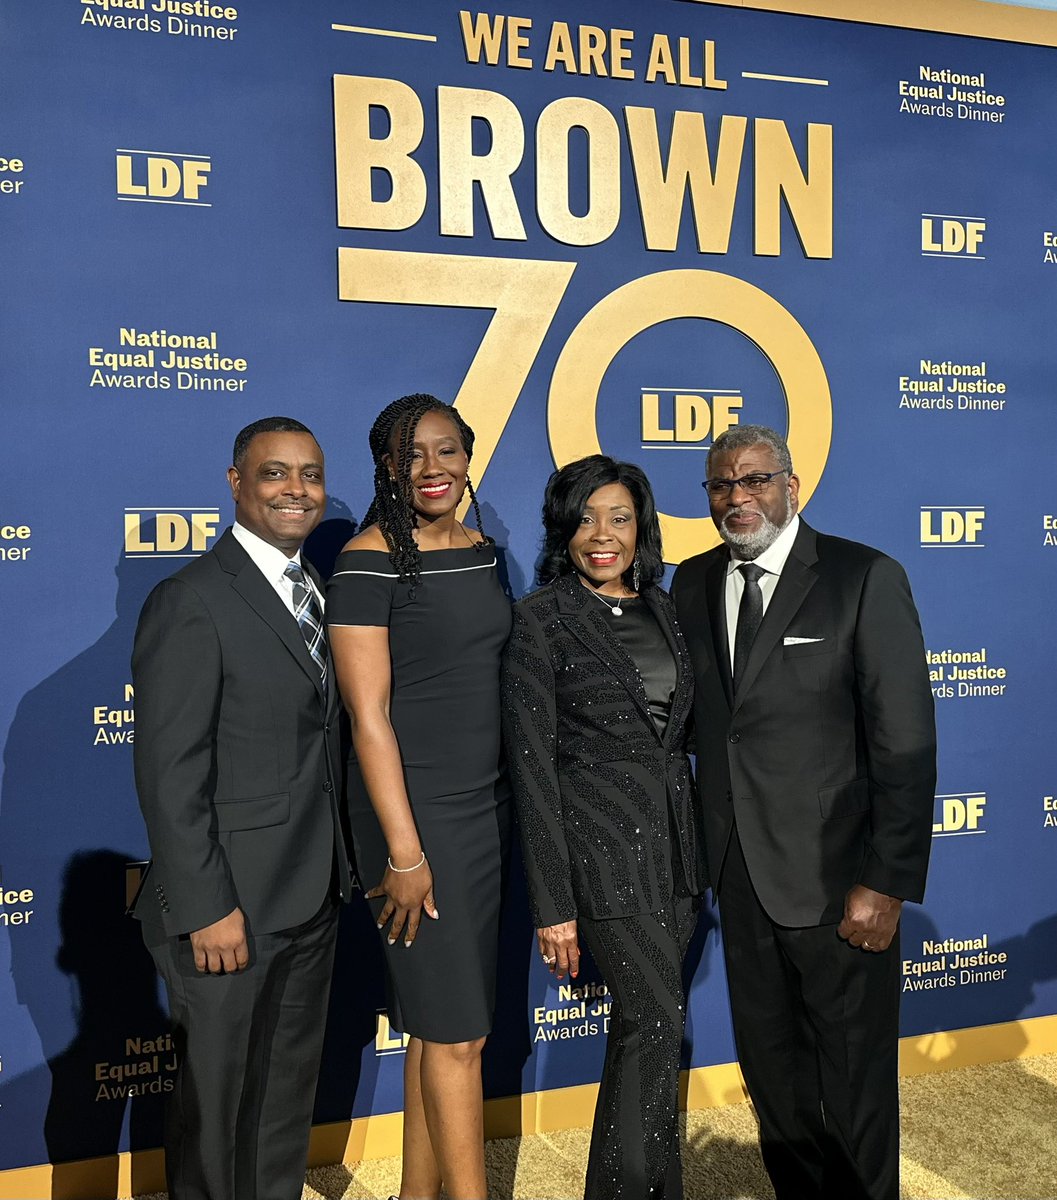 What a magnificent evening celebrating the 70th anniversary of #BrownvsBoard at the @NAACP_LDF Dinner with @HopeCUbill . The New Orleans delegation was well represented @WendellPierce @JonBatiste @MarcABarnes 
#WeAreAllBrown
#NEJAD2024